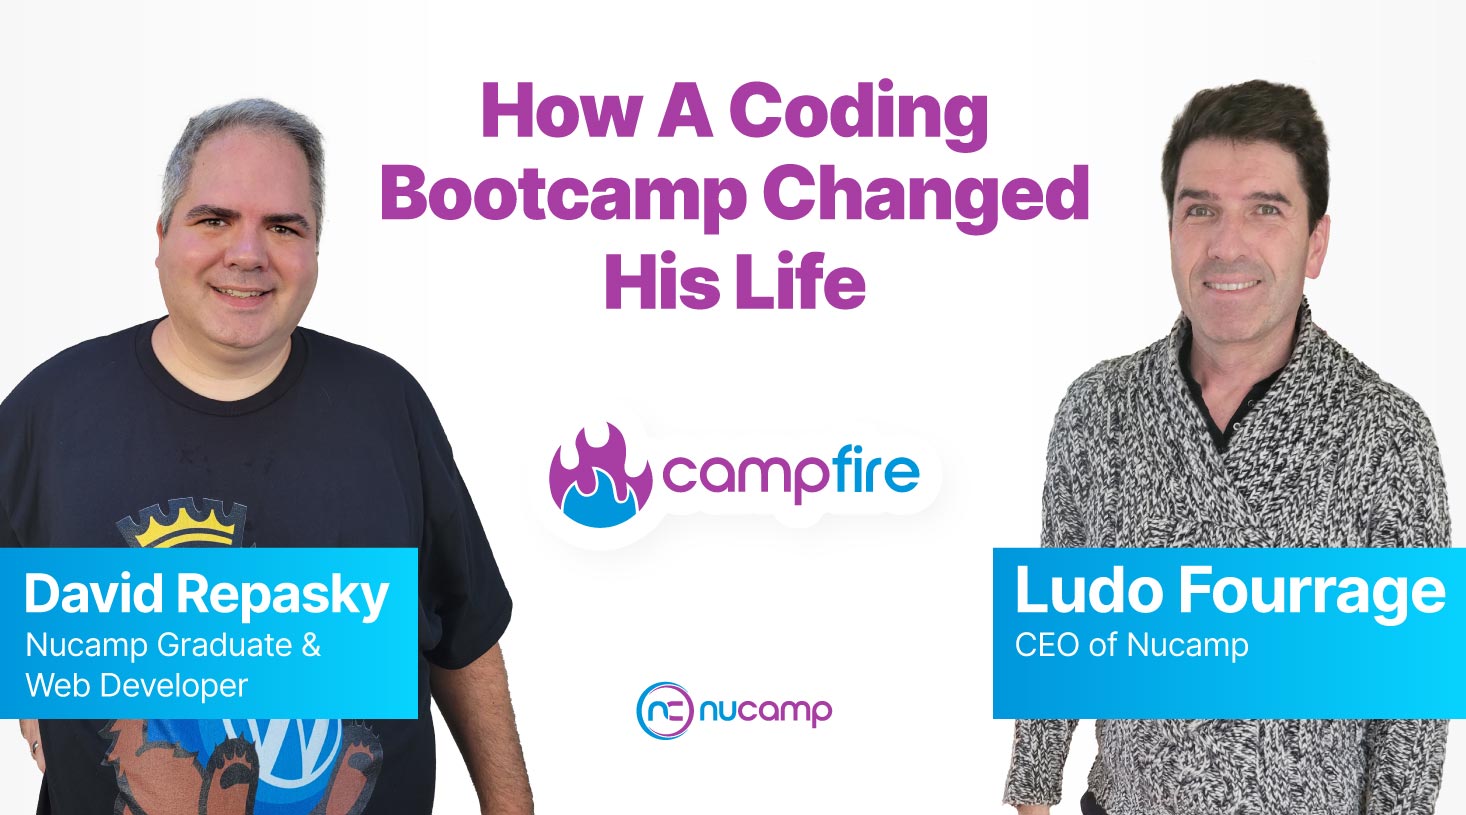 Coding bootcamp changes his life